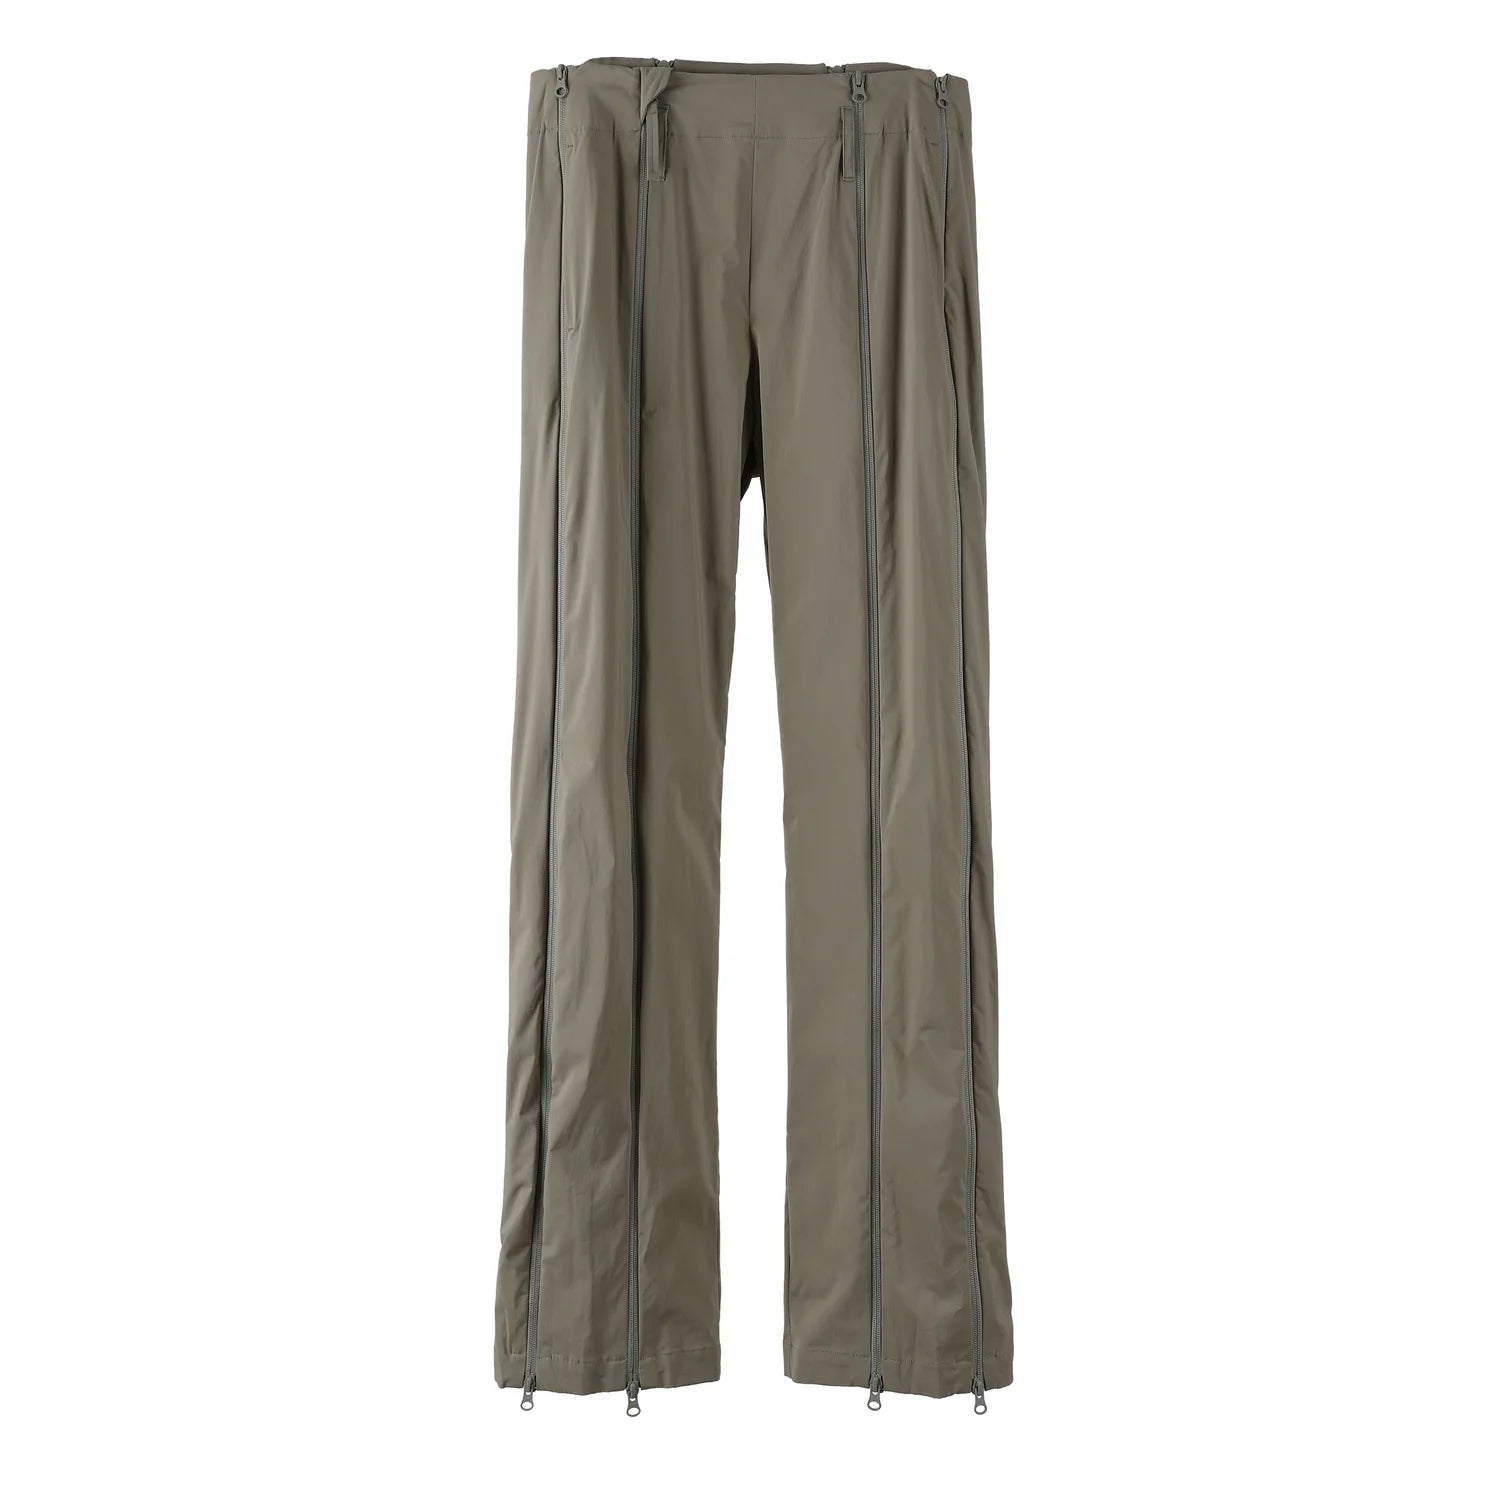 POST ARCHIVE FACTION - 5.0+ Technical Pants Center - (Olive Green)